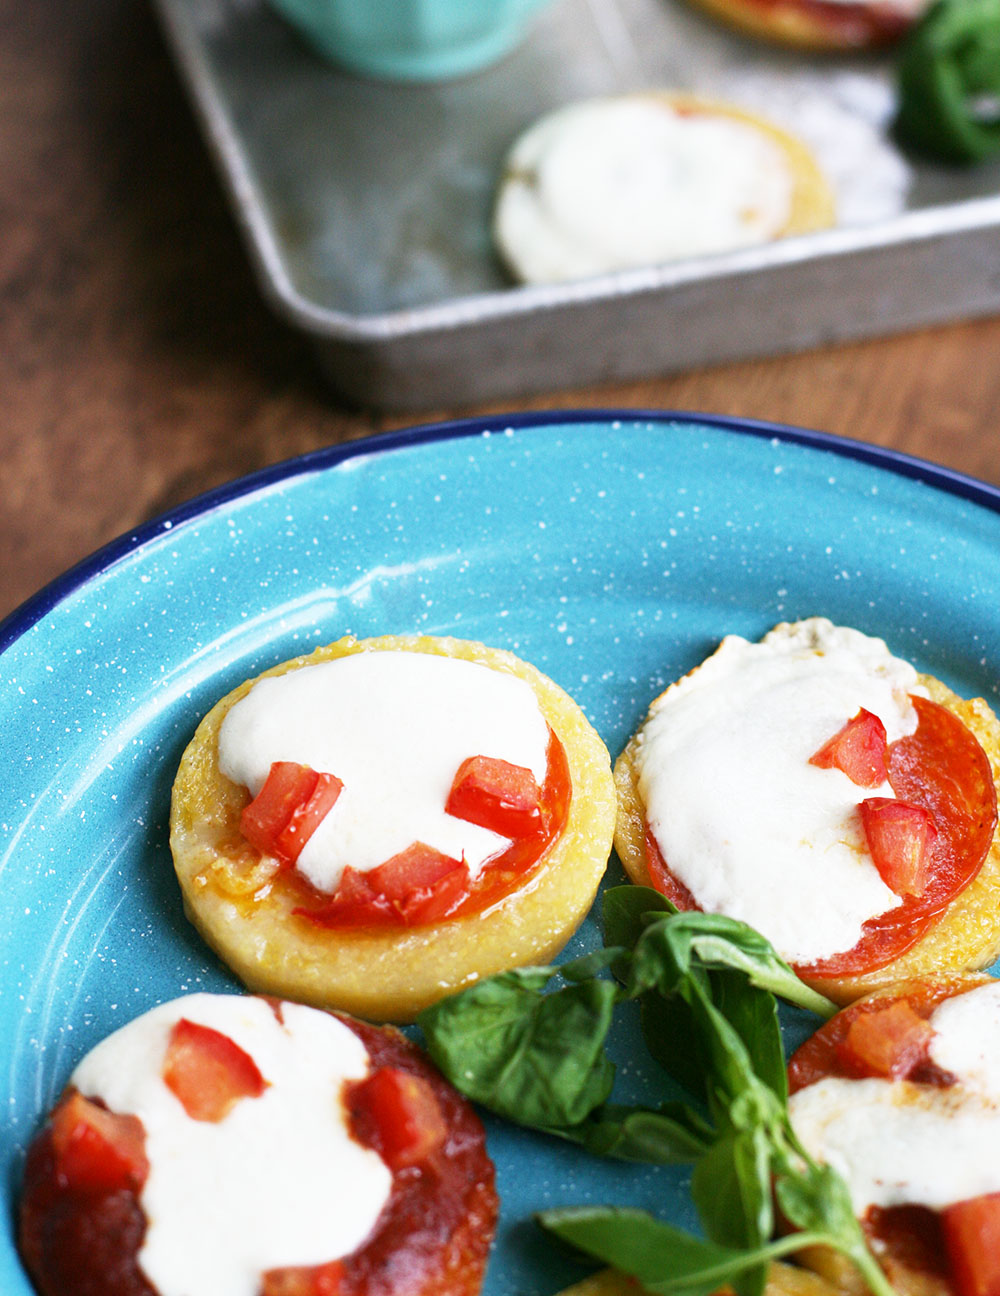 Polenta pizza bites: Slices of polenta topped with tomato sauce, cheese, and other toppings.